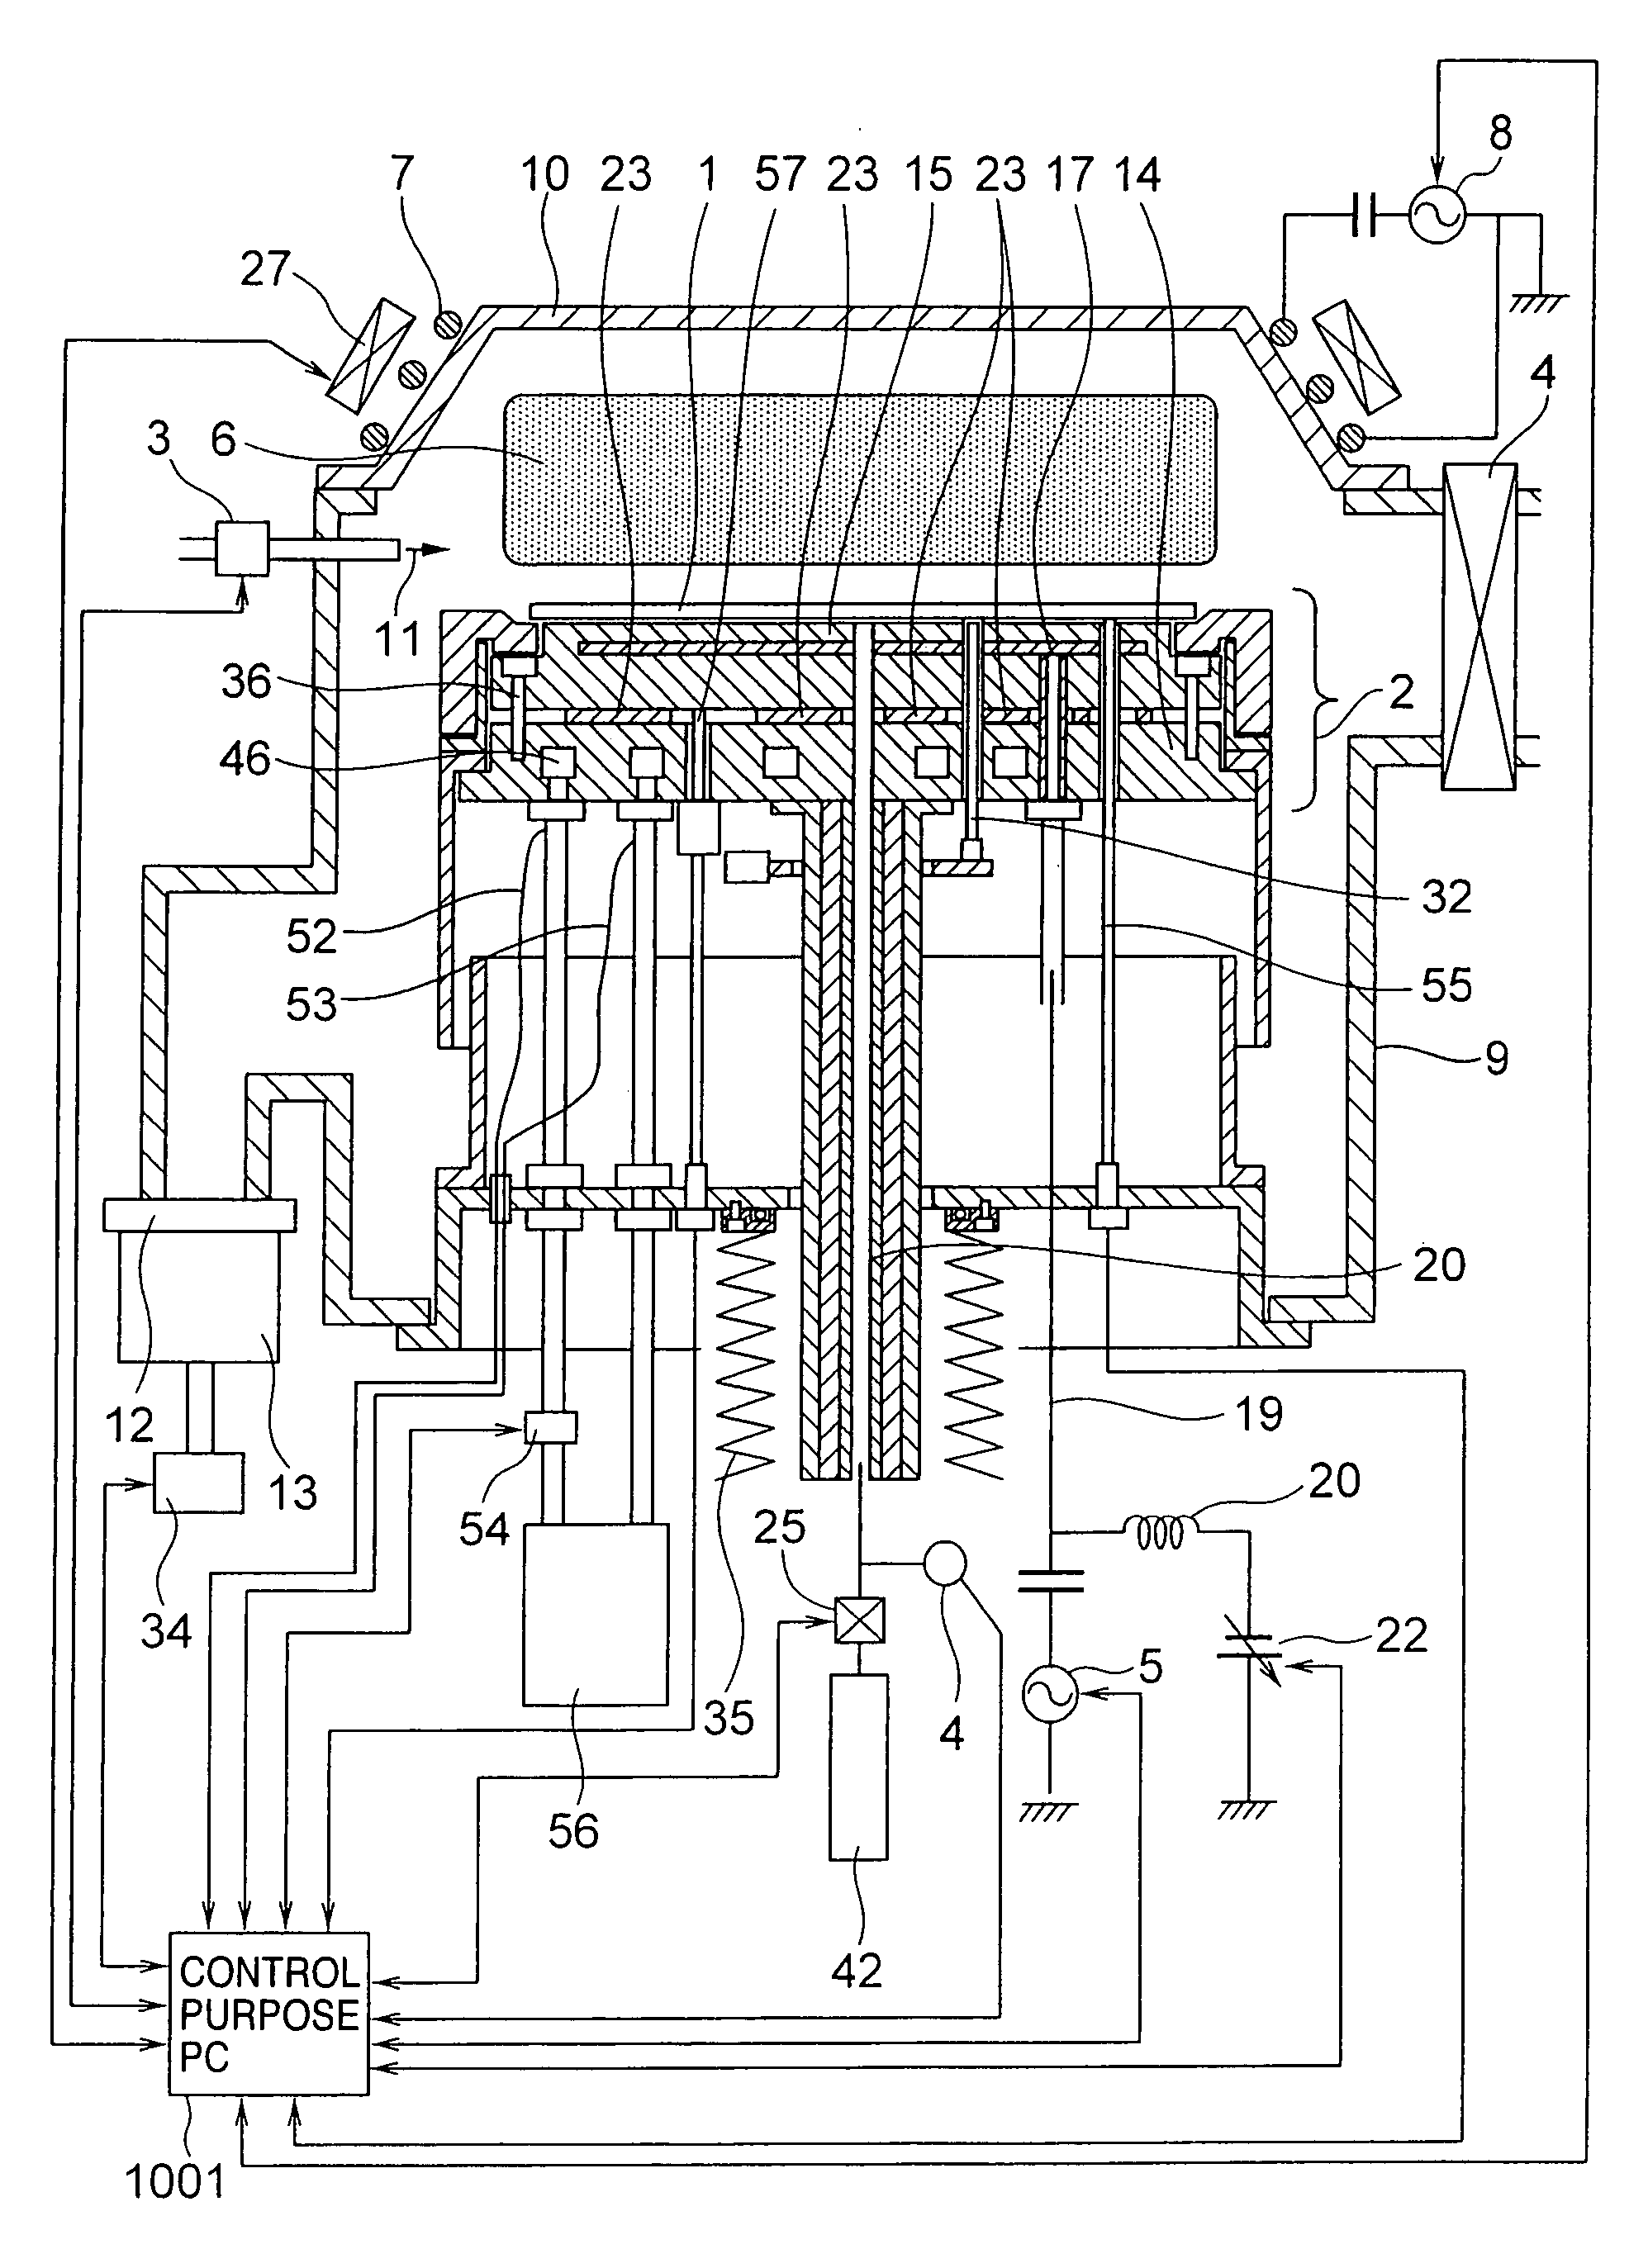 Wafer processing apparatus capable of controlling wafer temperature